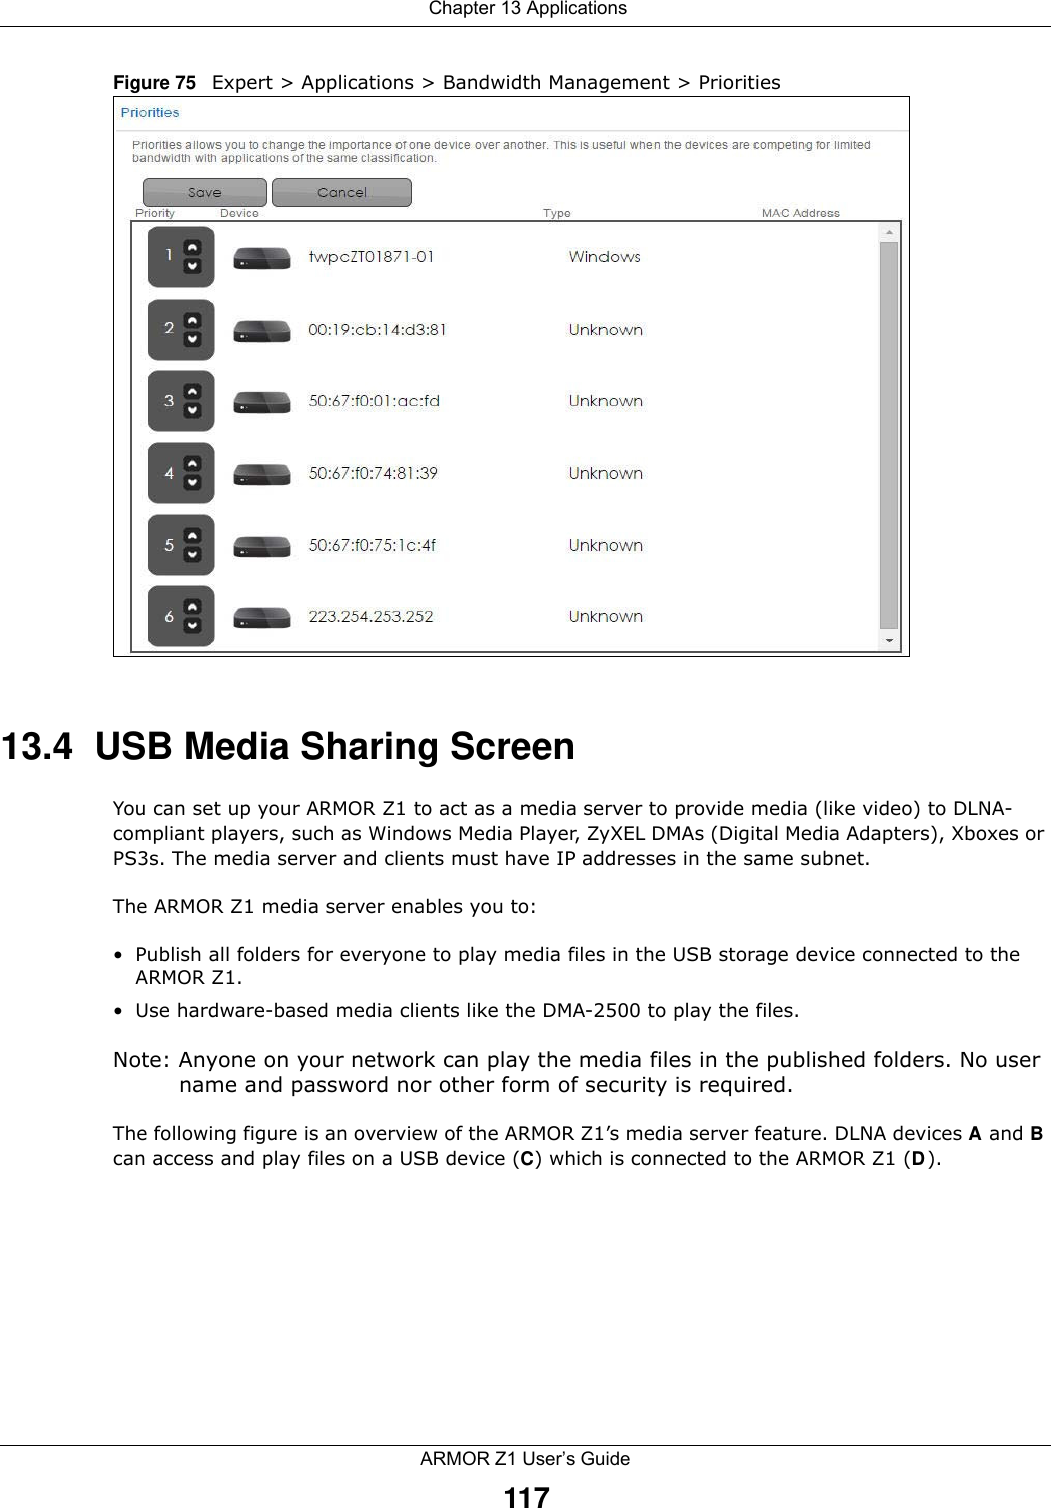  Chapter 13 ApplicationsARMOR Z1 User’s Guide117Figure 75   Expert &gt; Applications &gt; Bandwidth Management &gt; Priorities 13.4  USB Media Sharing ScreenYou can set up your ARMOR Z1 to act as a media server to provide media (like video) to DLNA-compliant players, such as Windows Media Player, ZyXEL DMAs (Digital Media Adapters), Xboxes or PS3s. The media server and clients must have IP addresses in the same subnet.The ARMOR Z1 media server enables you to:• Publish all folders for everyone to play media files in the USB storage device connected to the ARMOR Z1.• Use hardware-based media clients like the DMA-2500 to play the files.Note: Anyone on your network can play the media files in the published folders. No user name and password nor other form of security is required. The following figure is an overview of the ARMOR Z1’s media server feature. DLNA devices A and B can access and play files on a USB device (C) which is connected to the ARMOR Z1 (D).